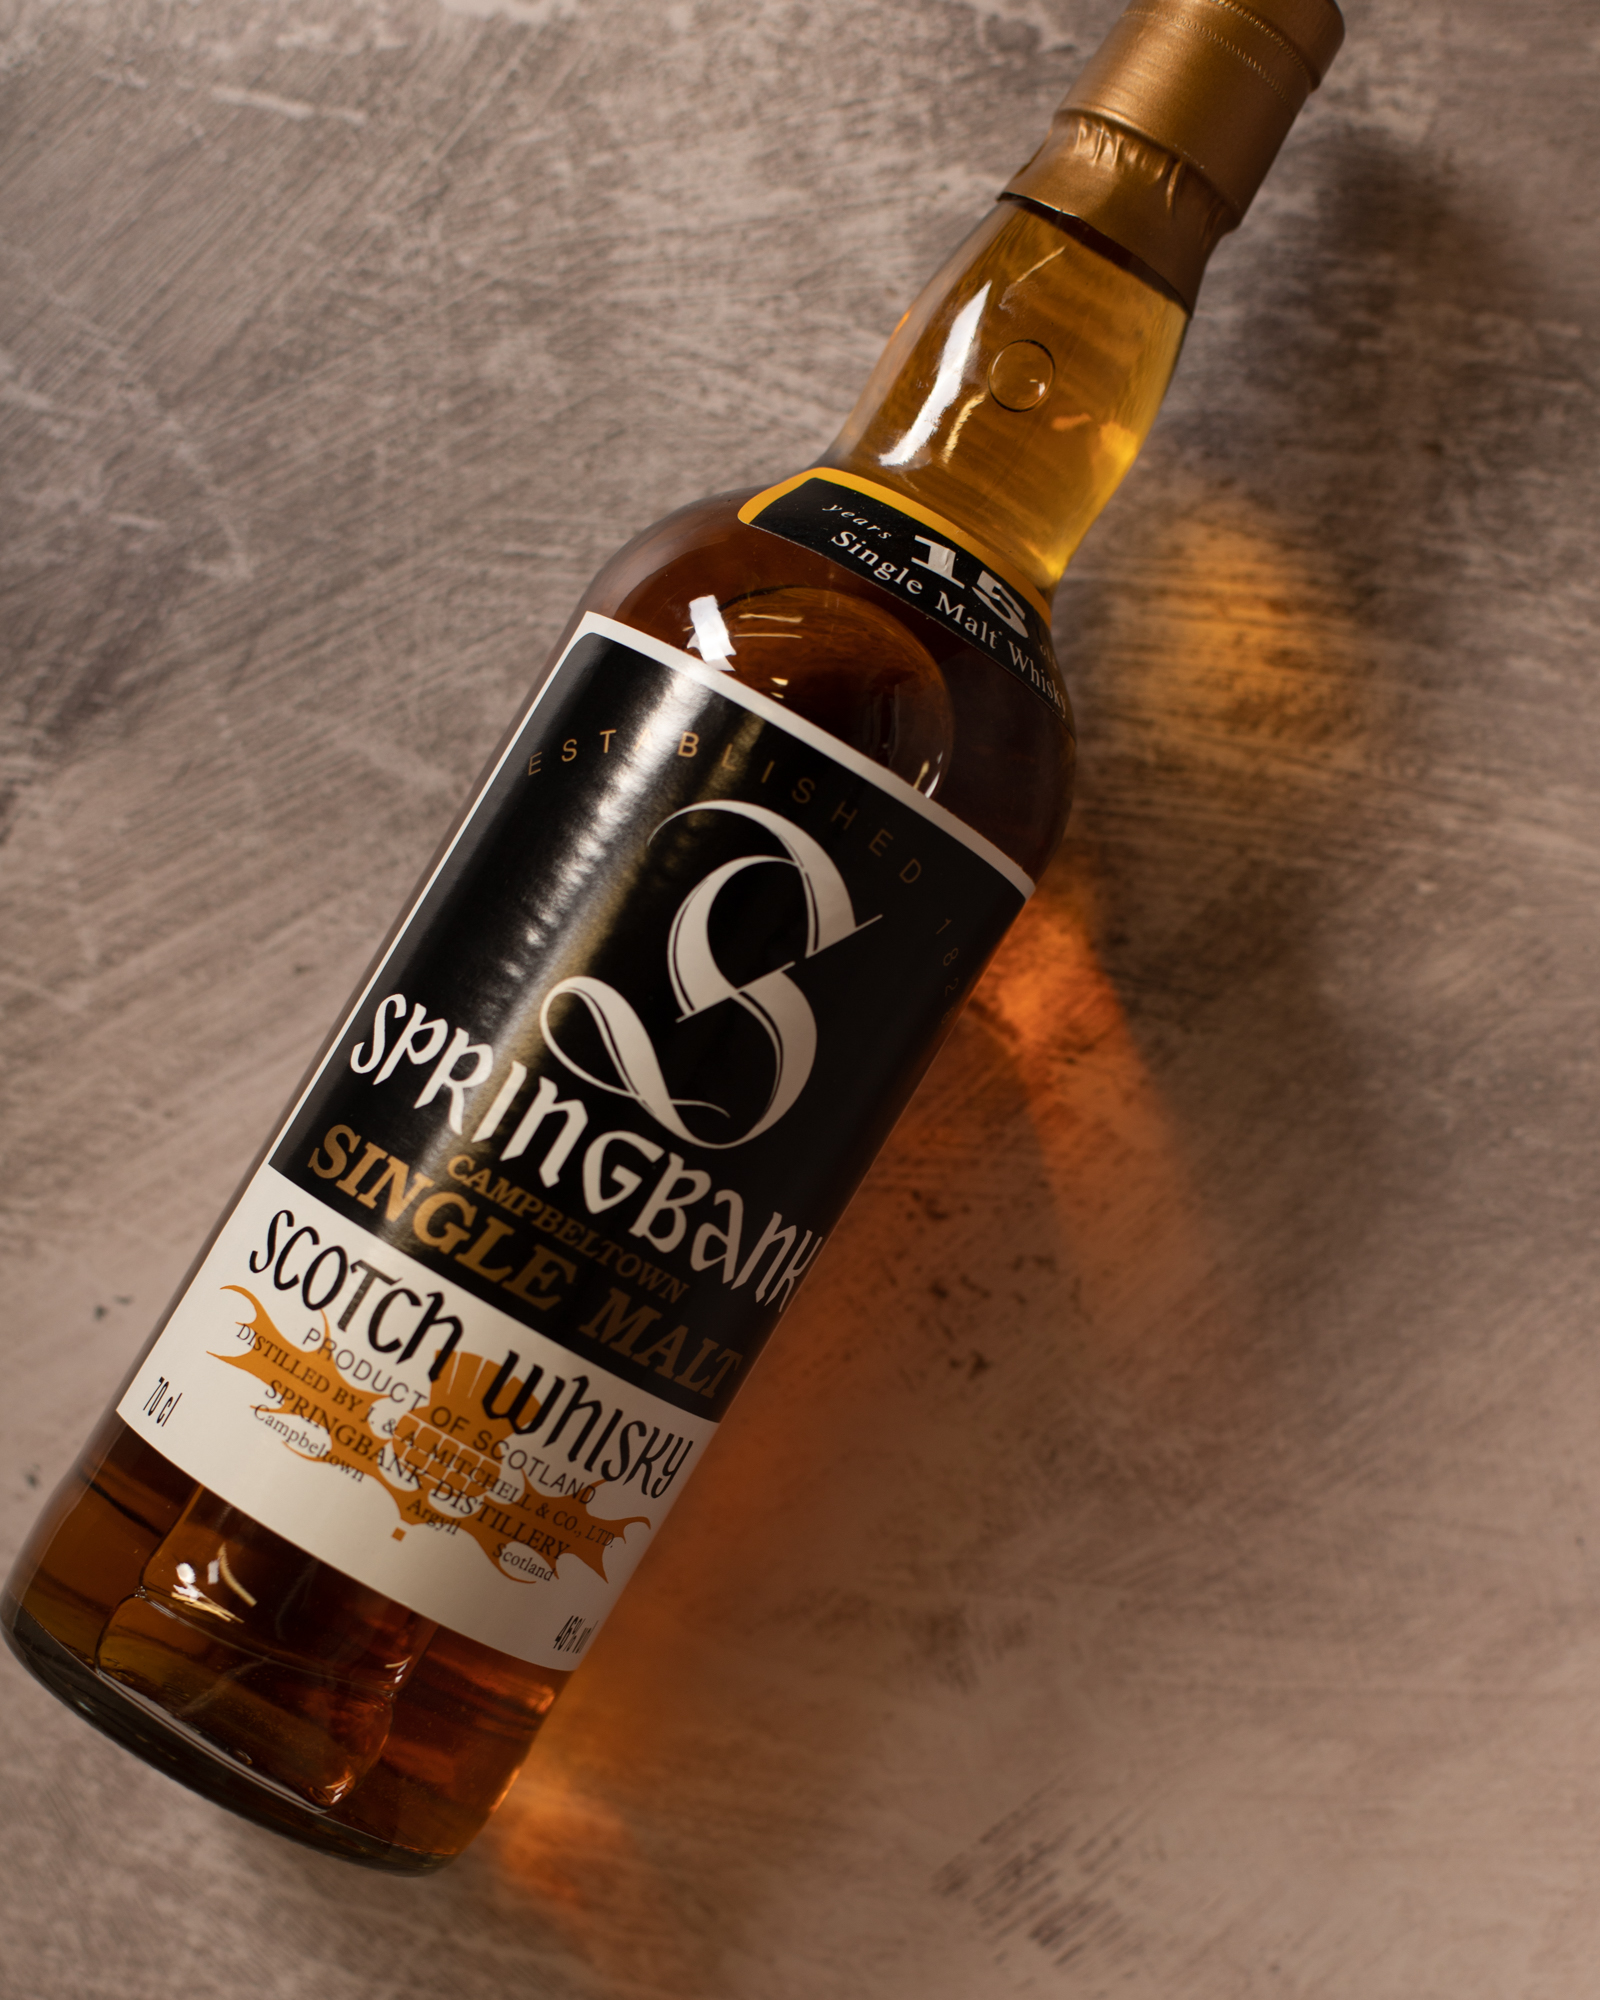 Springbank: The Top 5 Most Expensive Bottles At Auction - Mark Littler